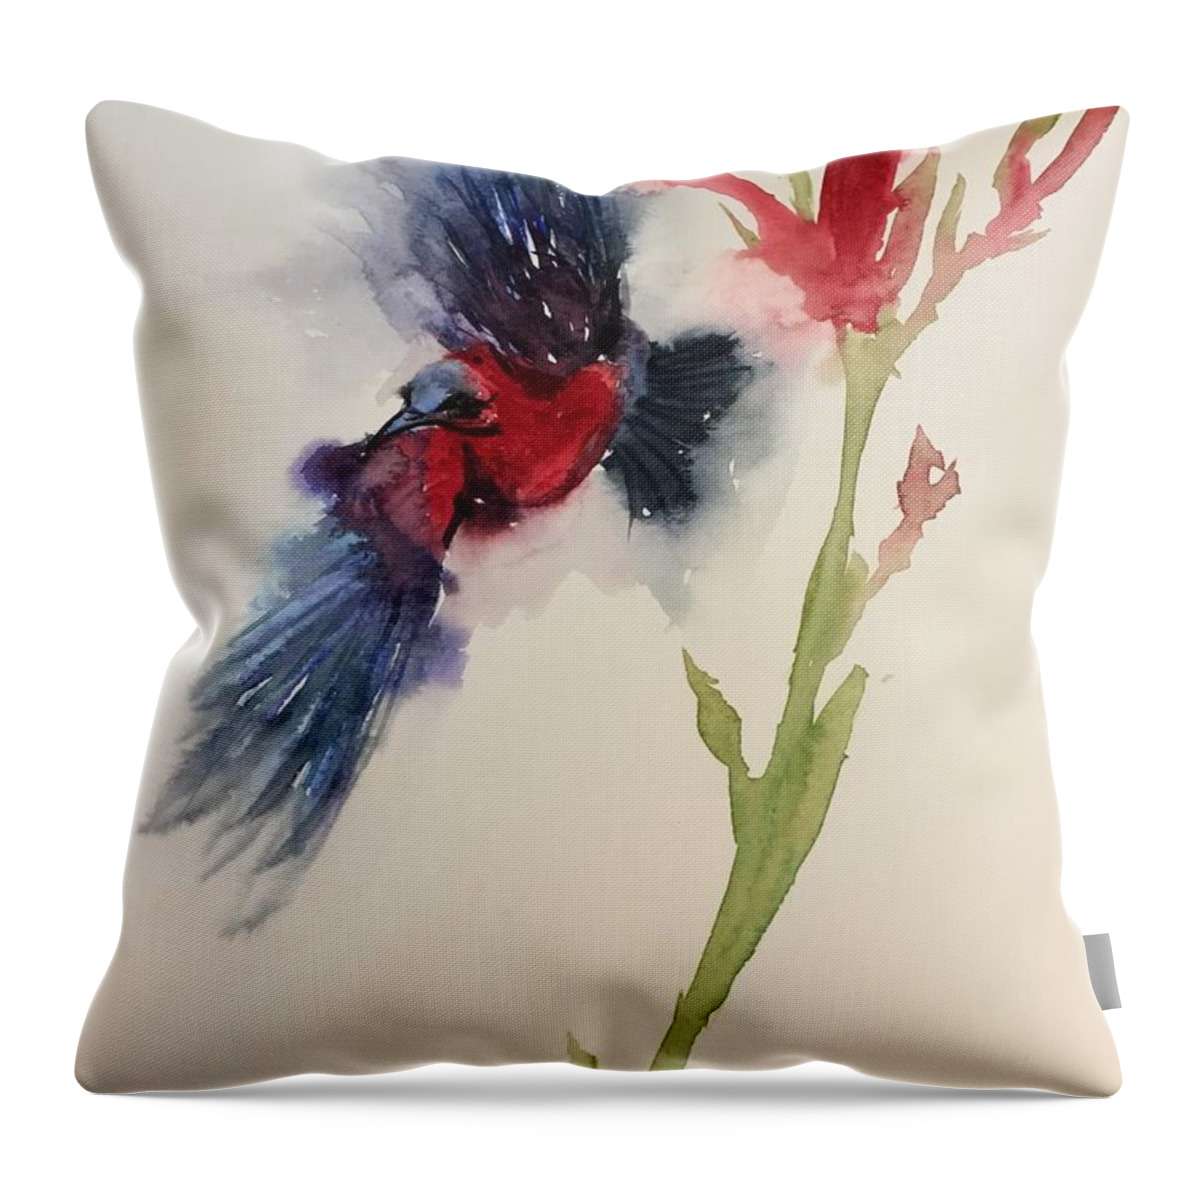 1882019 Throw Pillow featuring the painting 1882019 by Han in Huang wong